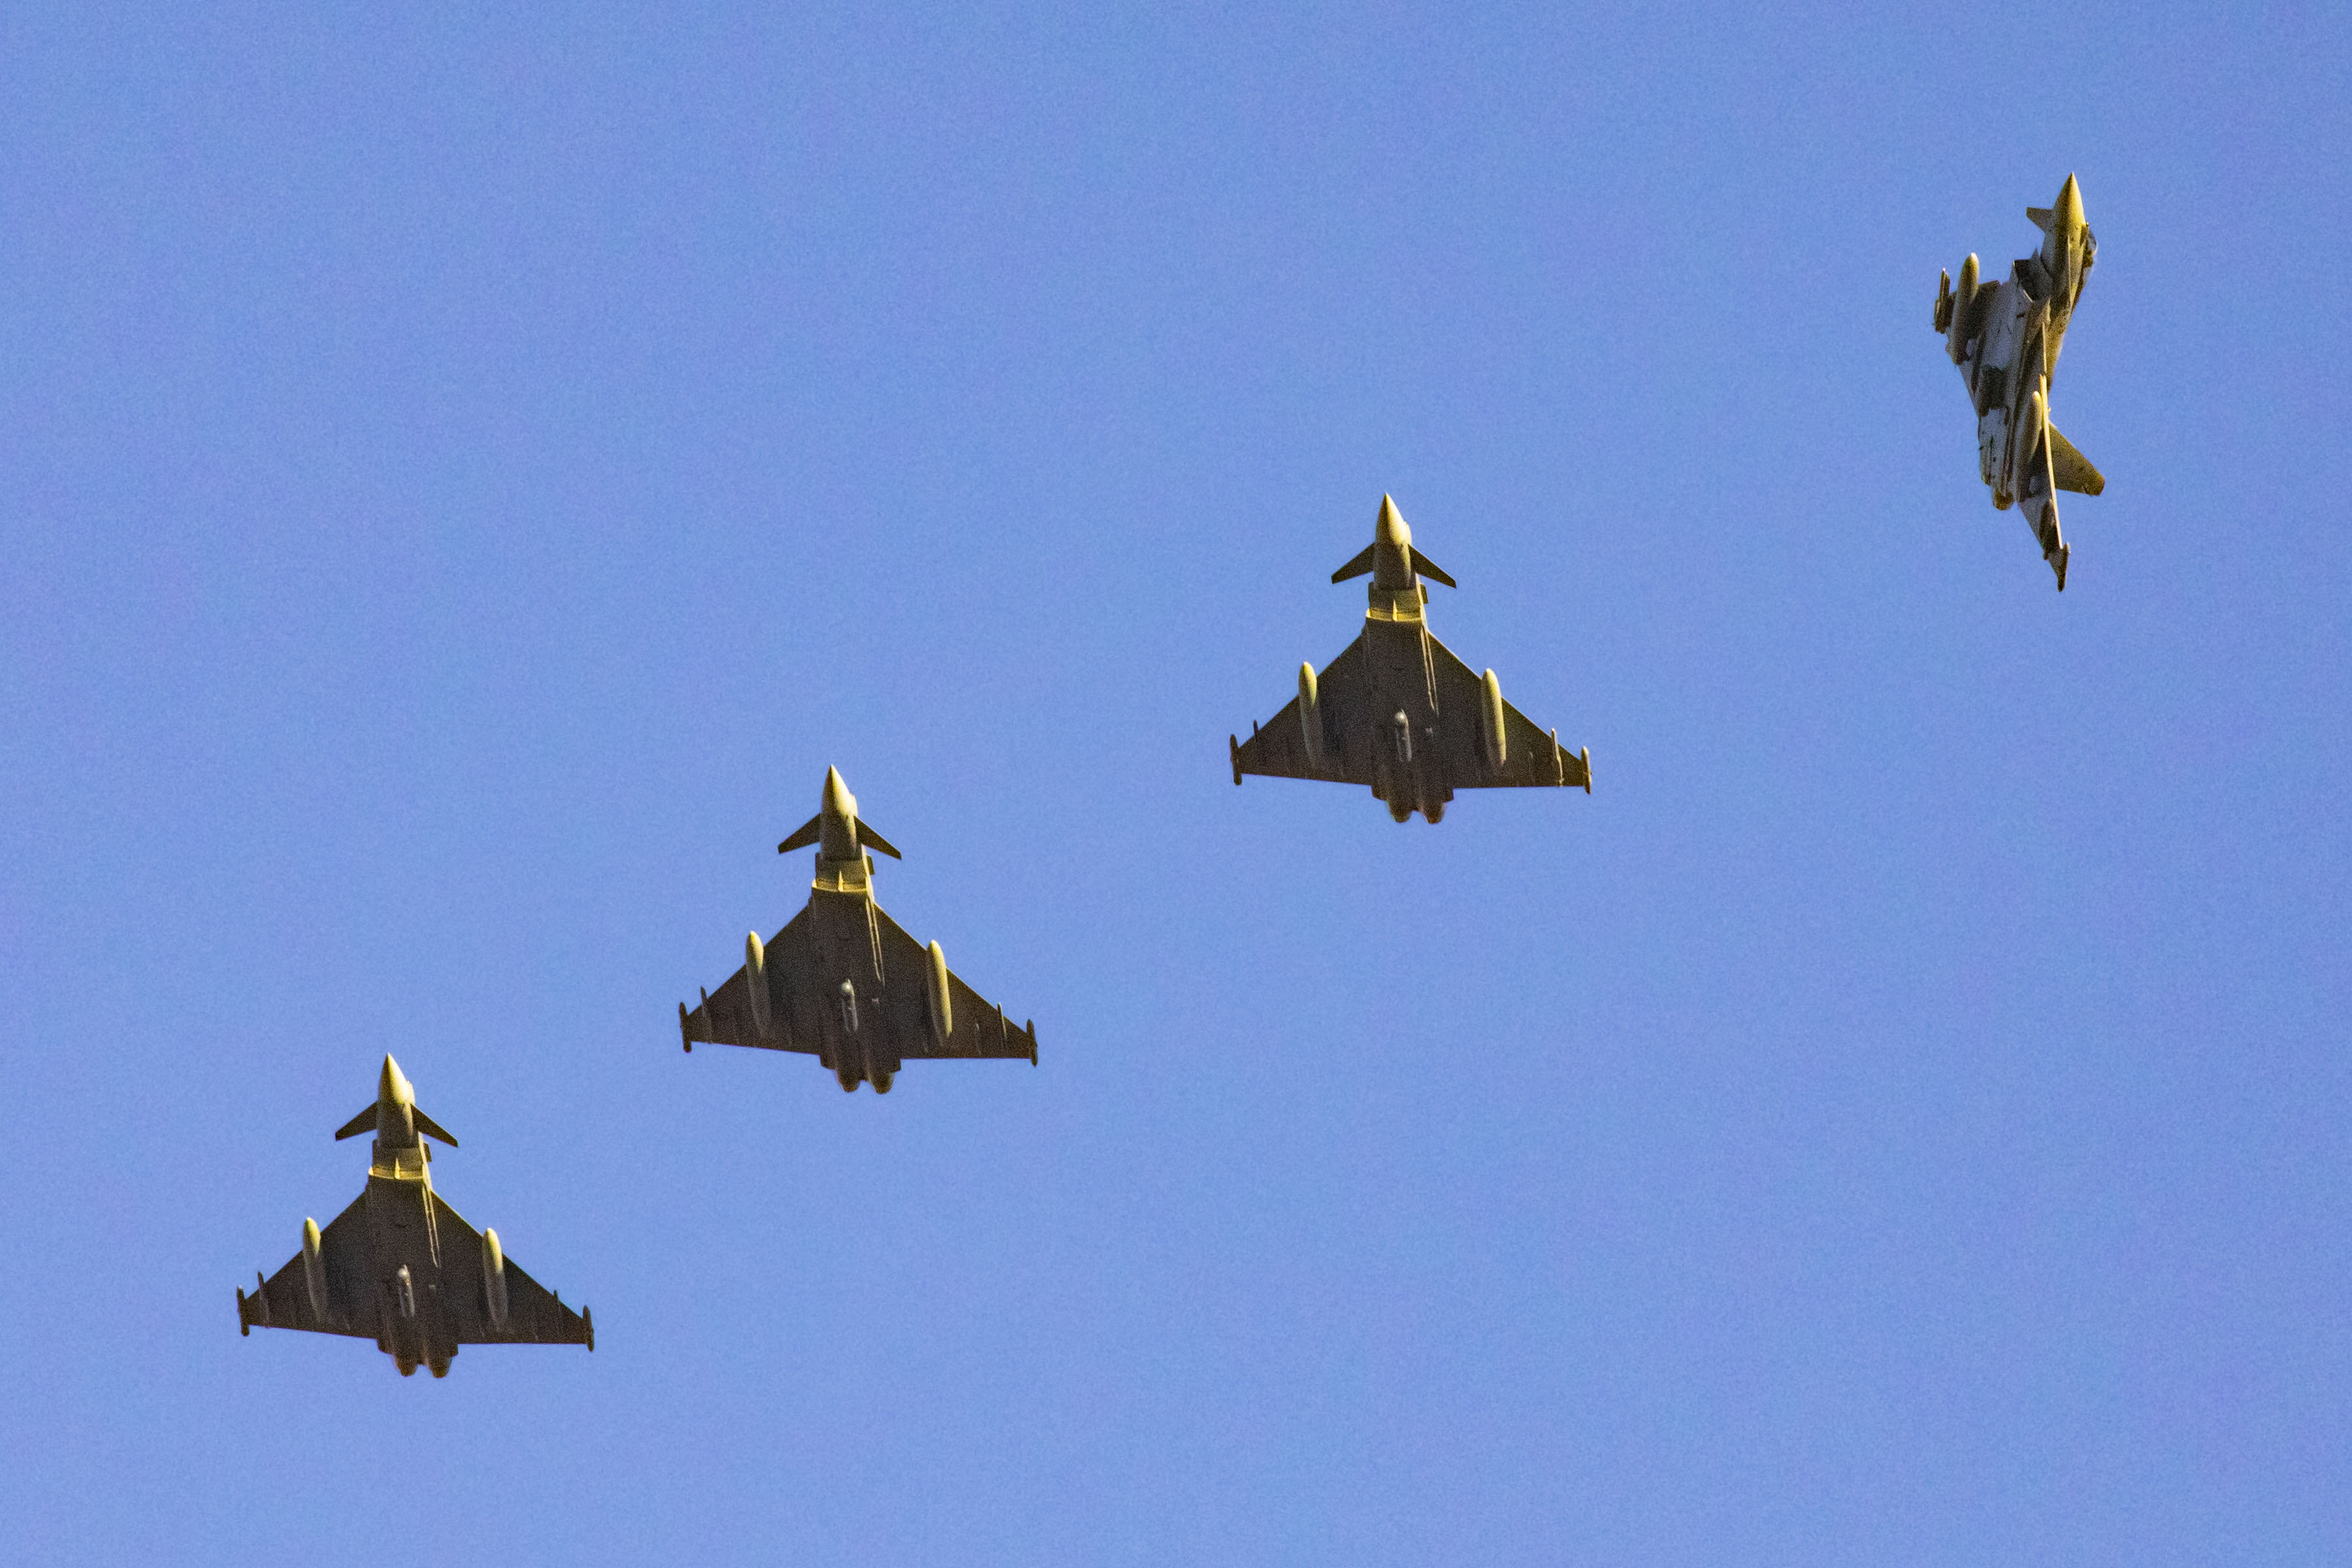 four typhoon aircraft flying in formation, with the right-most typhoon peeling off. bright blue sky